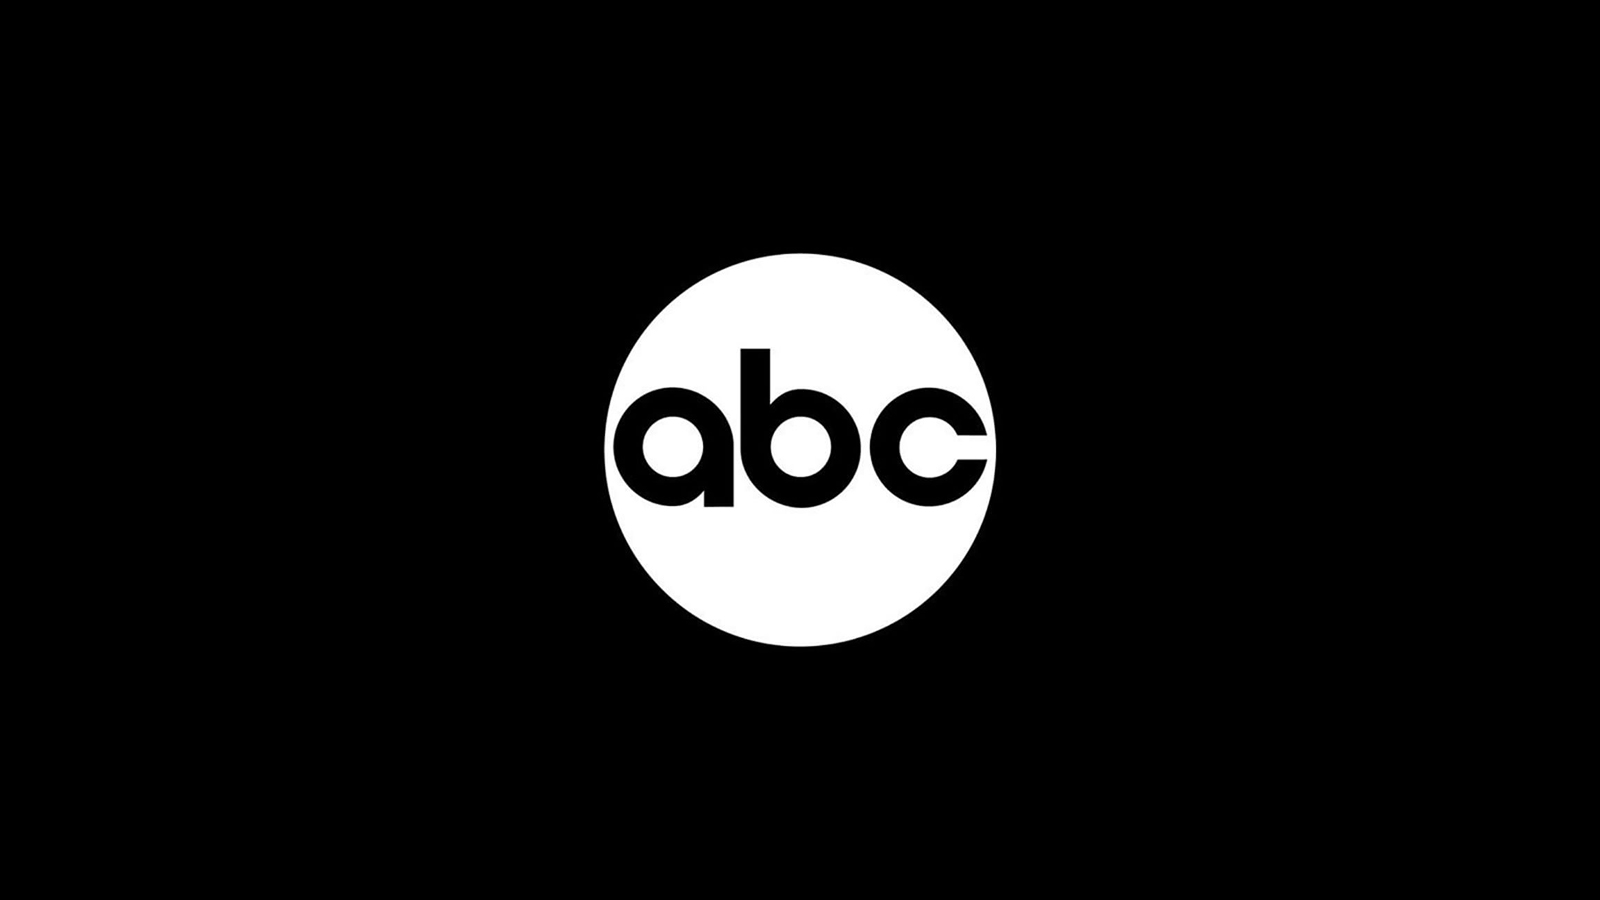 What Channel is ABC on Spectrum?